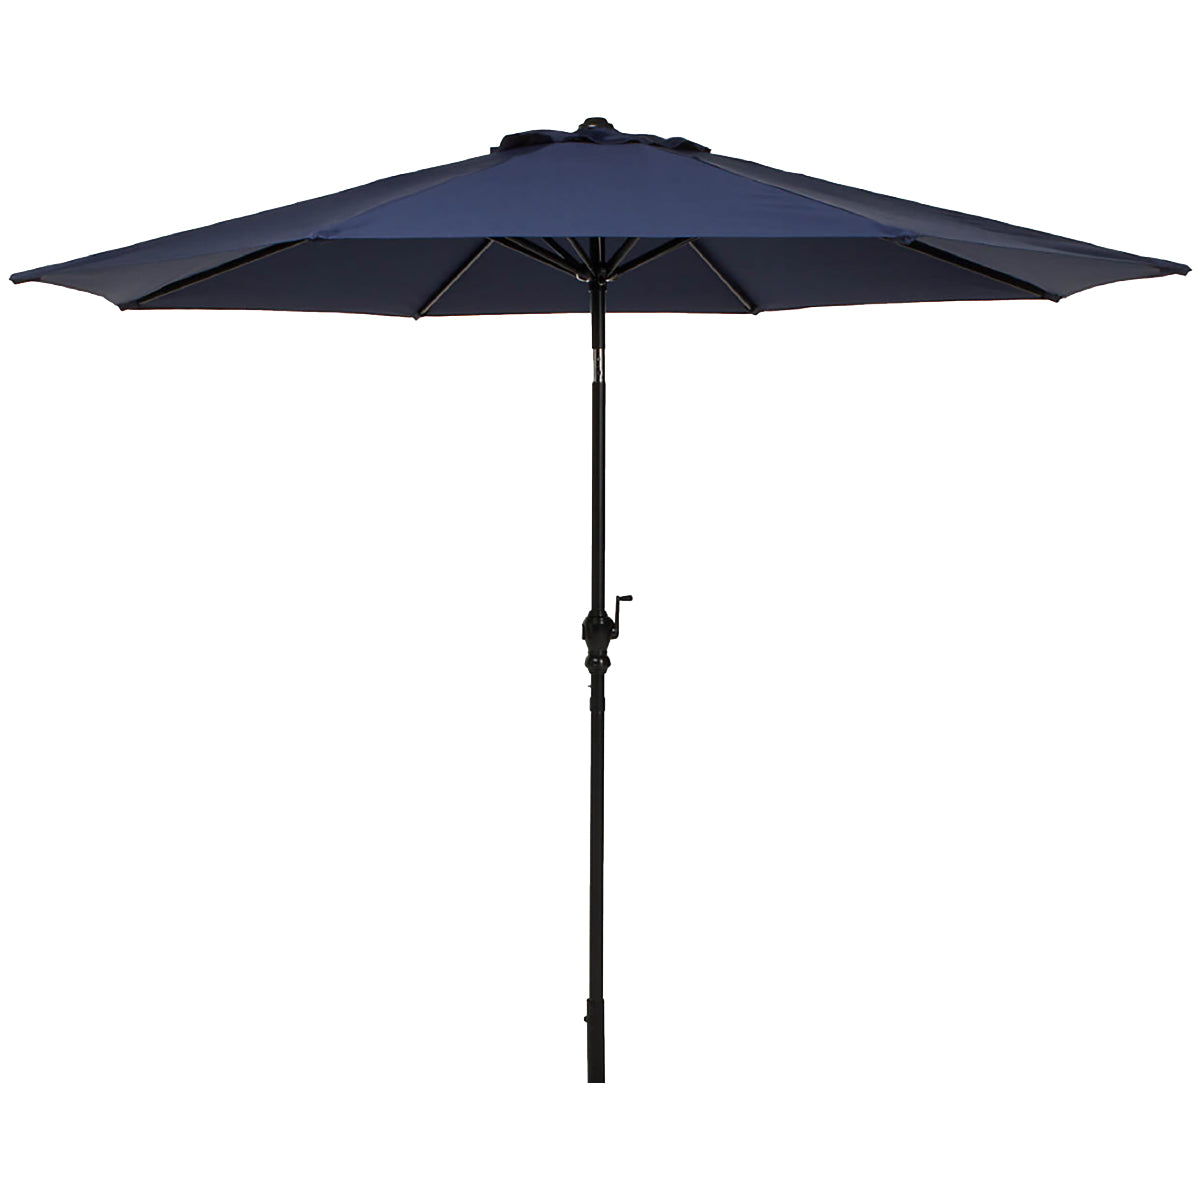 Chaby 9 Ft. Steel Patio Umbrella - Multiple Colors